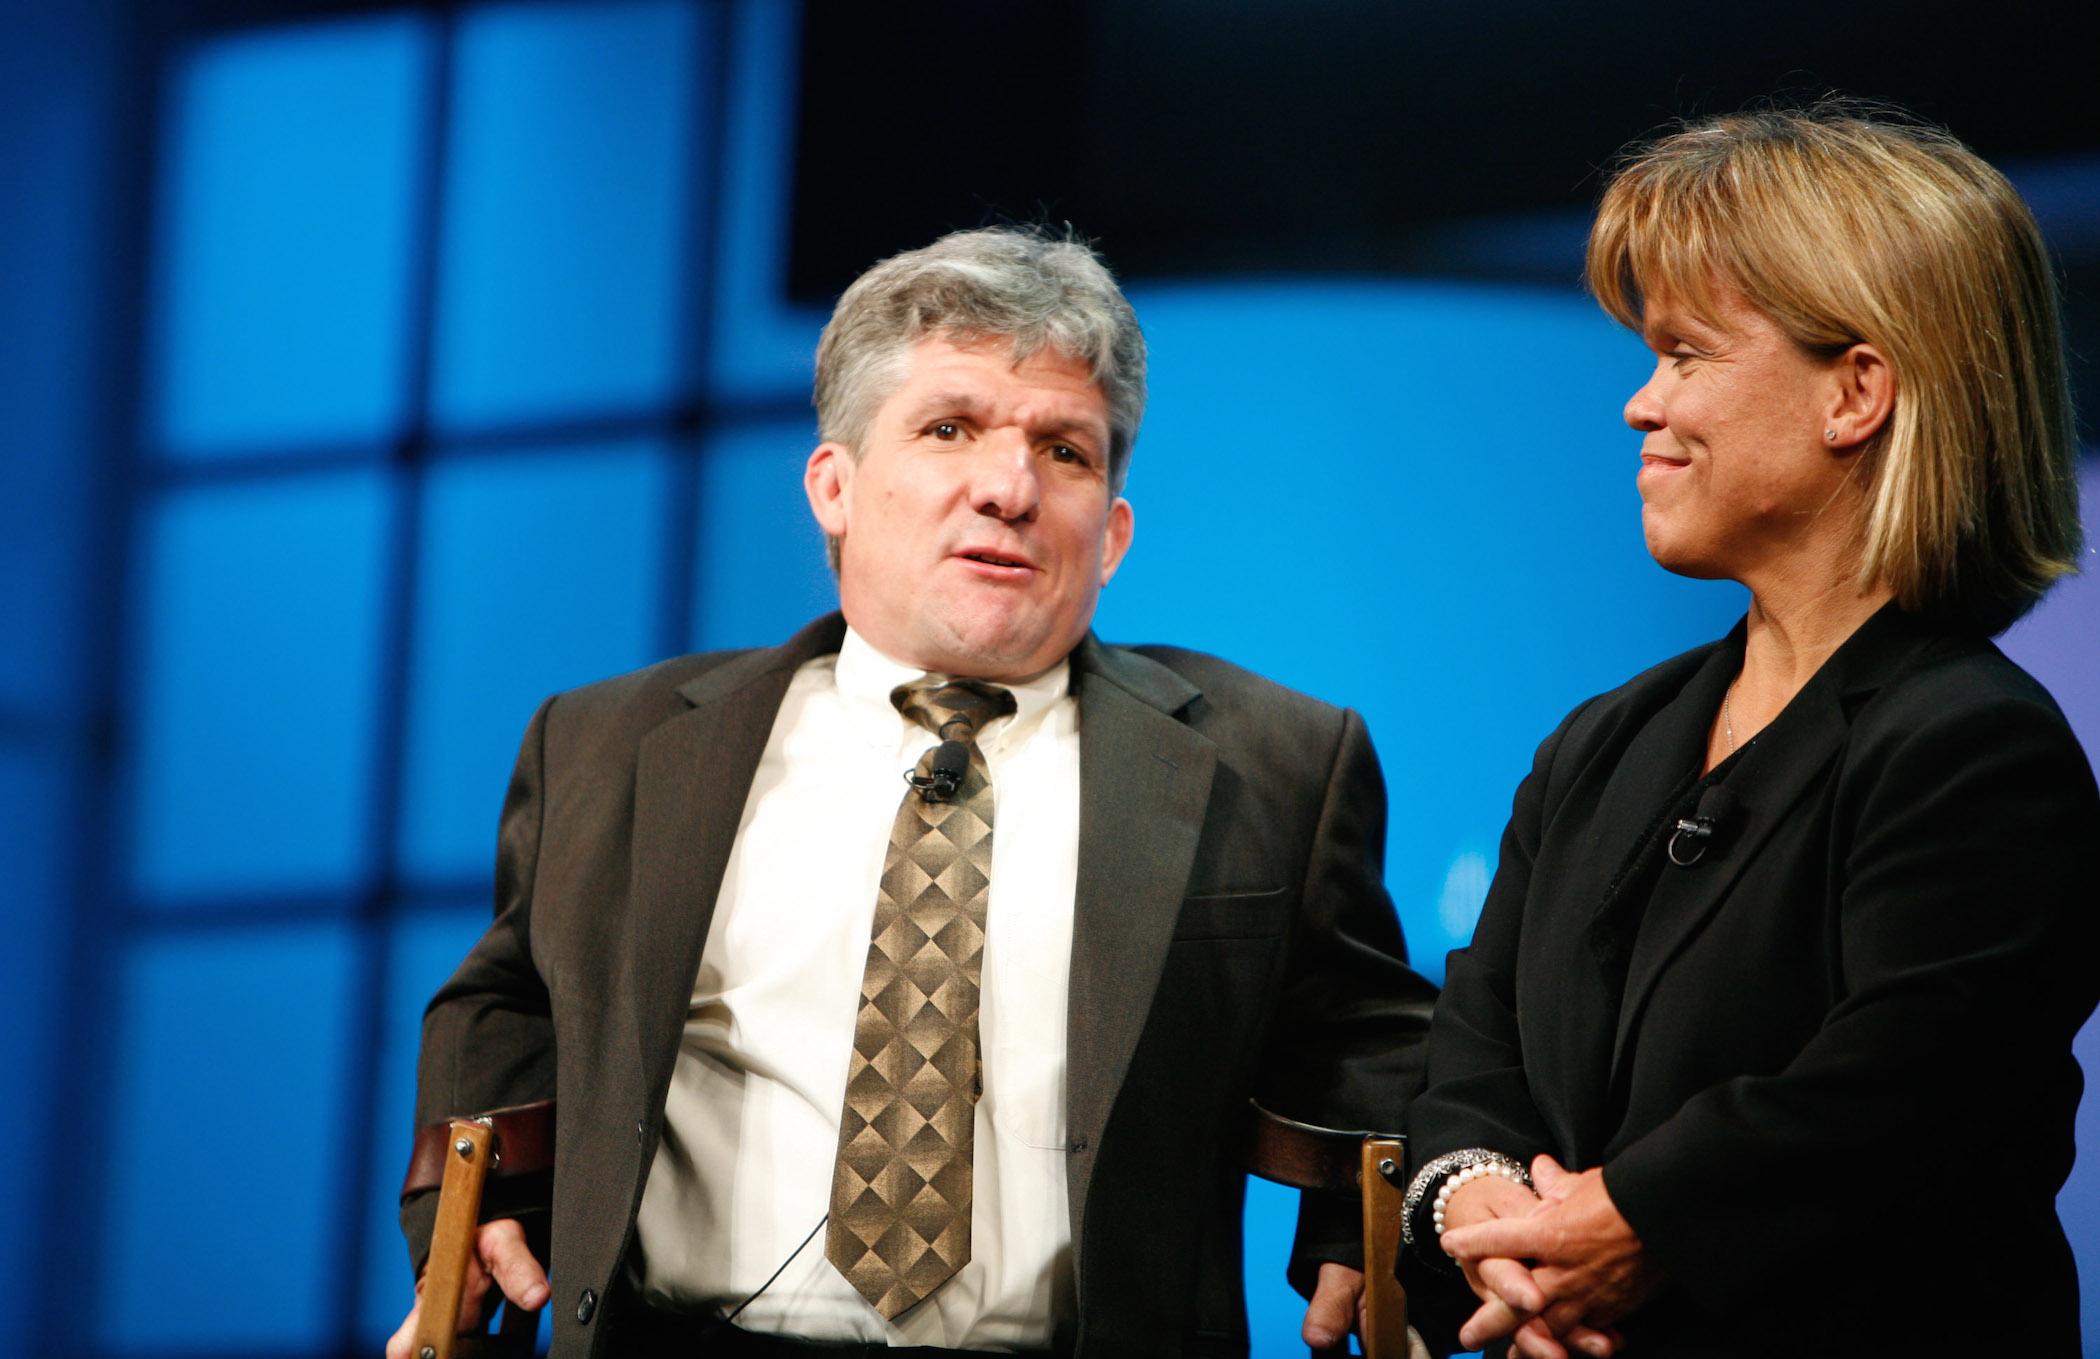 'Little People, Big World' star Matt Roloff (L) and Amy Roloff, the parents of Zach Roloff and in-laws of Tori Roloff, speaking together at a conference